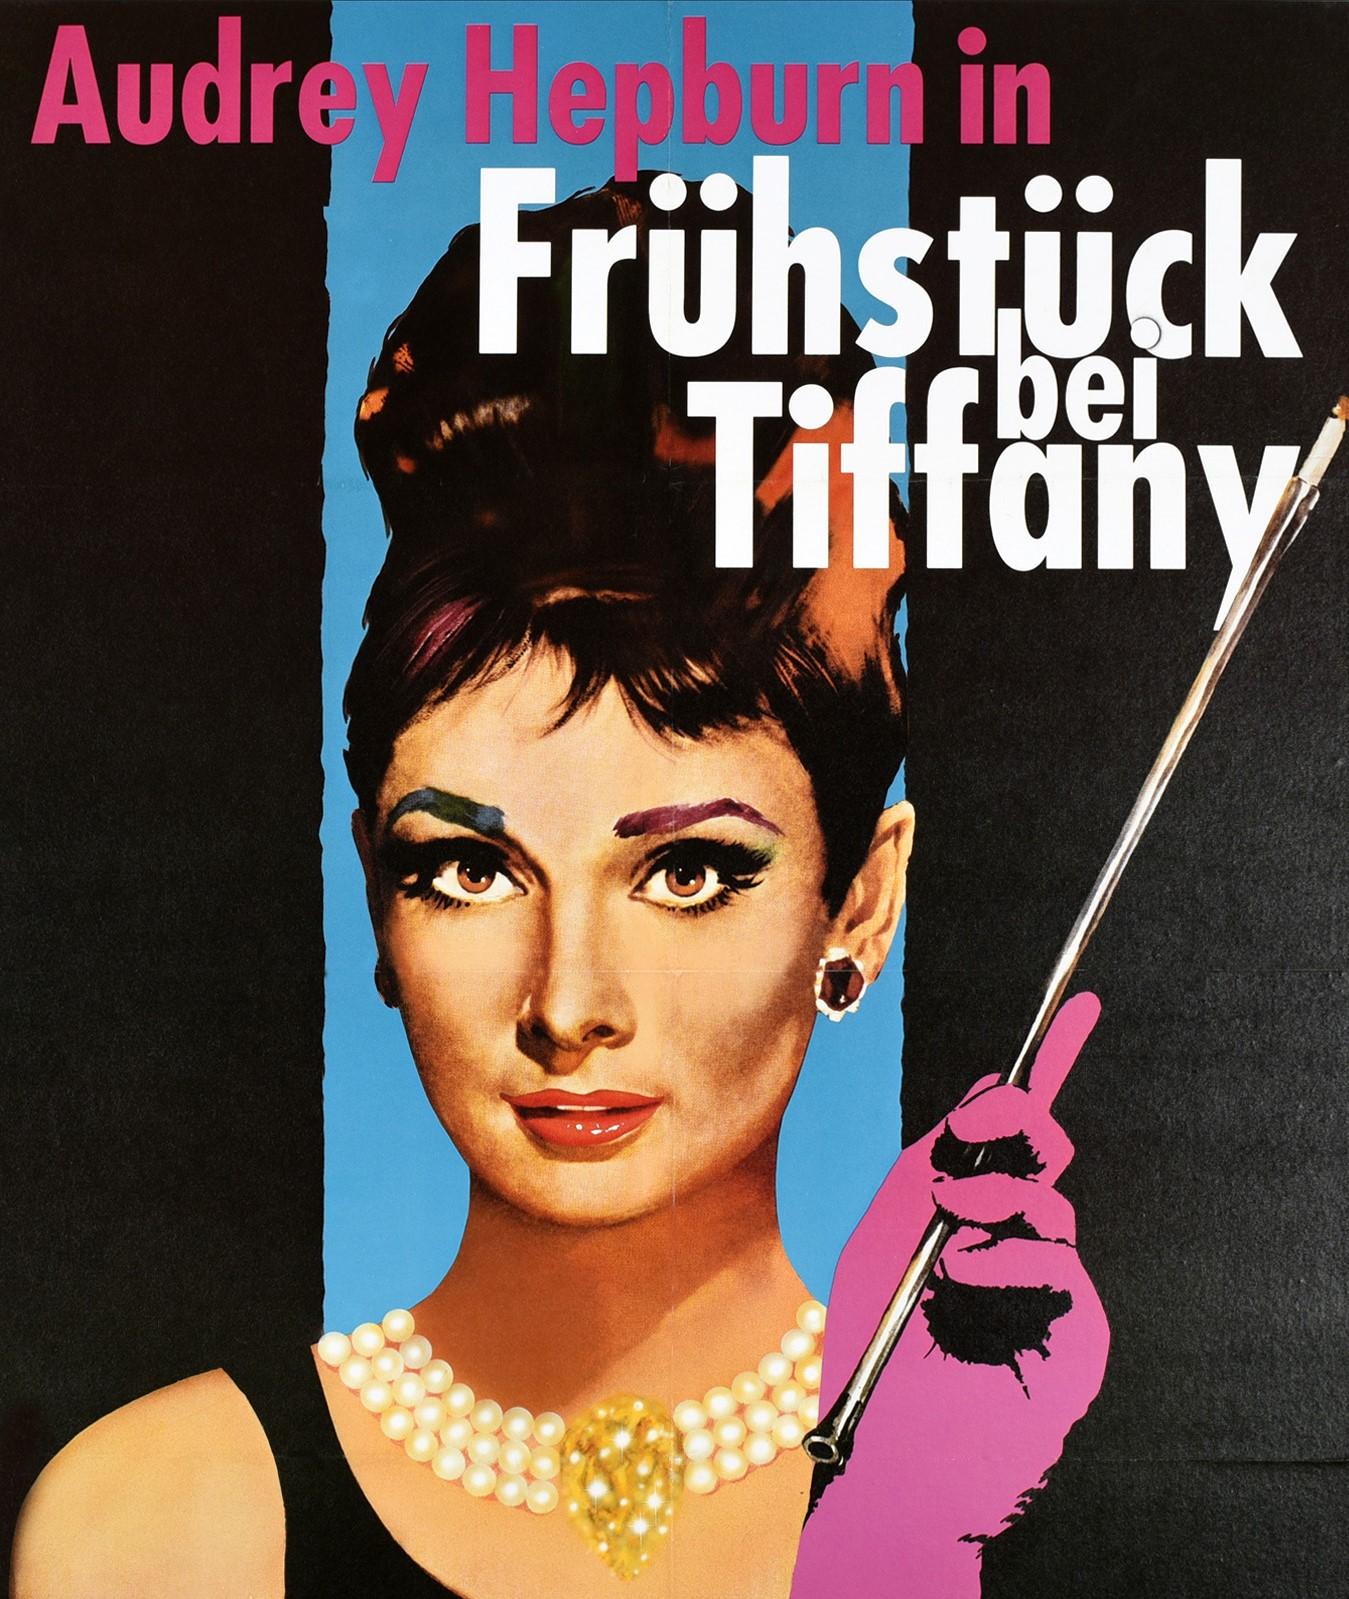 Original vintage movie poster for the 1980s German re-release of the 1961 classic film Breakfast at Tiffany's directed by Blake Edwards and starring Audrey Hepburn, George Peppard, Patricia Neal, Buddy Ebsen, Martin Balsam and Mickey Rooney. Great